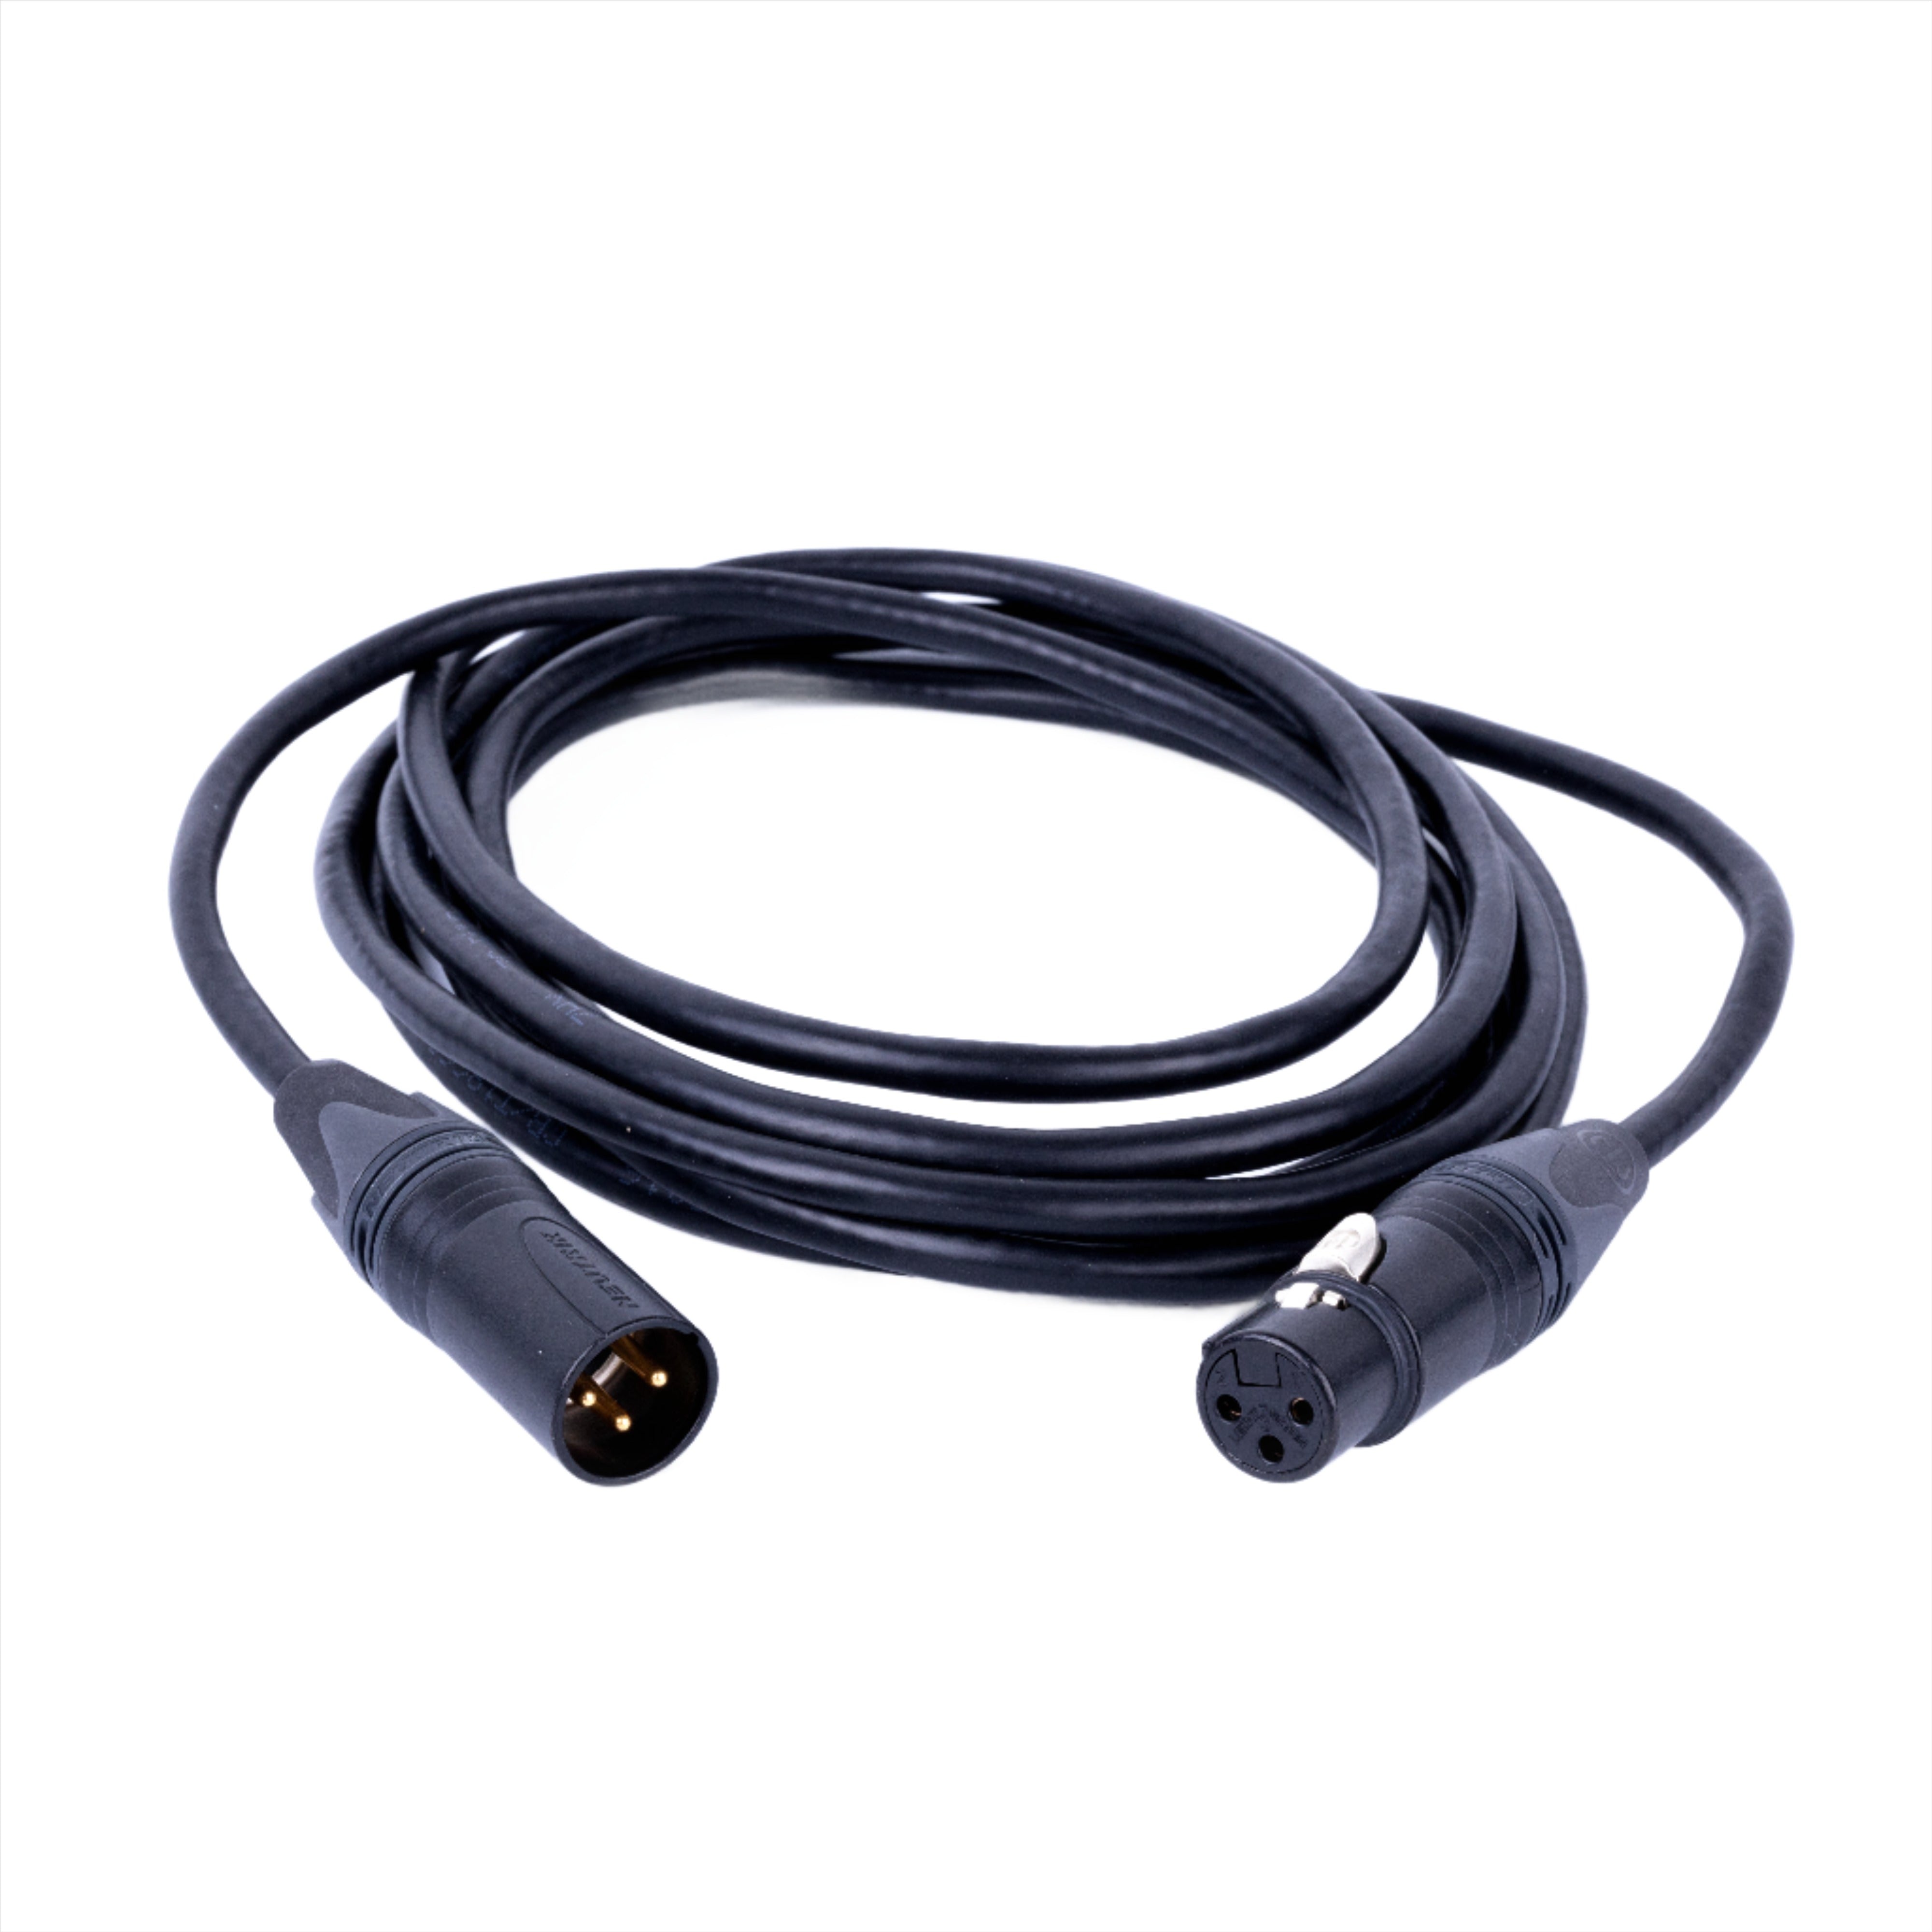 3 pin XLR Power Extension Cable